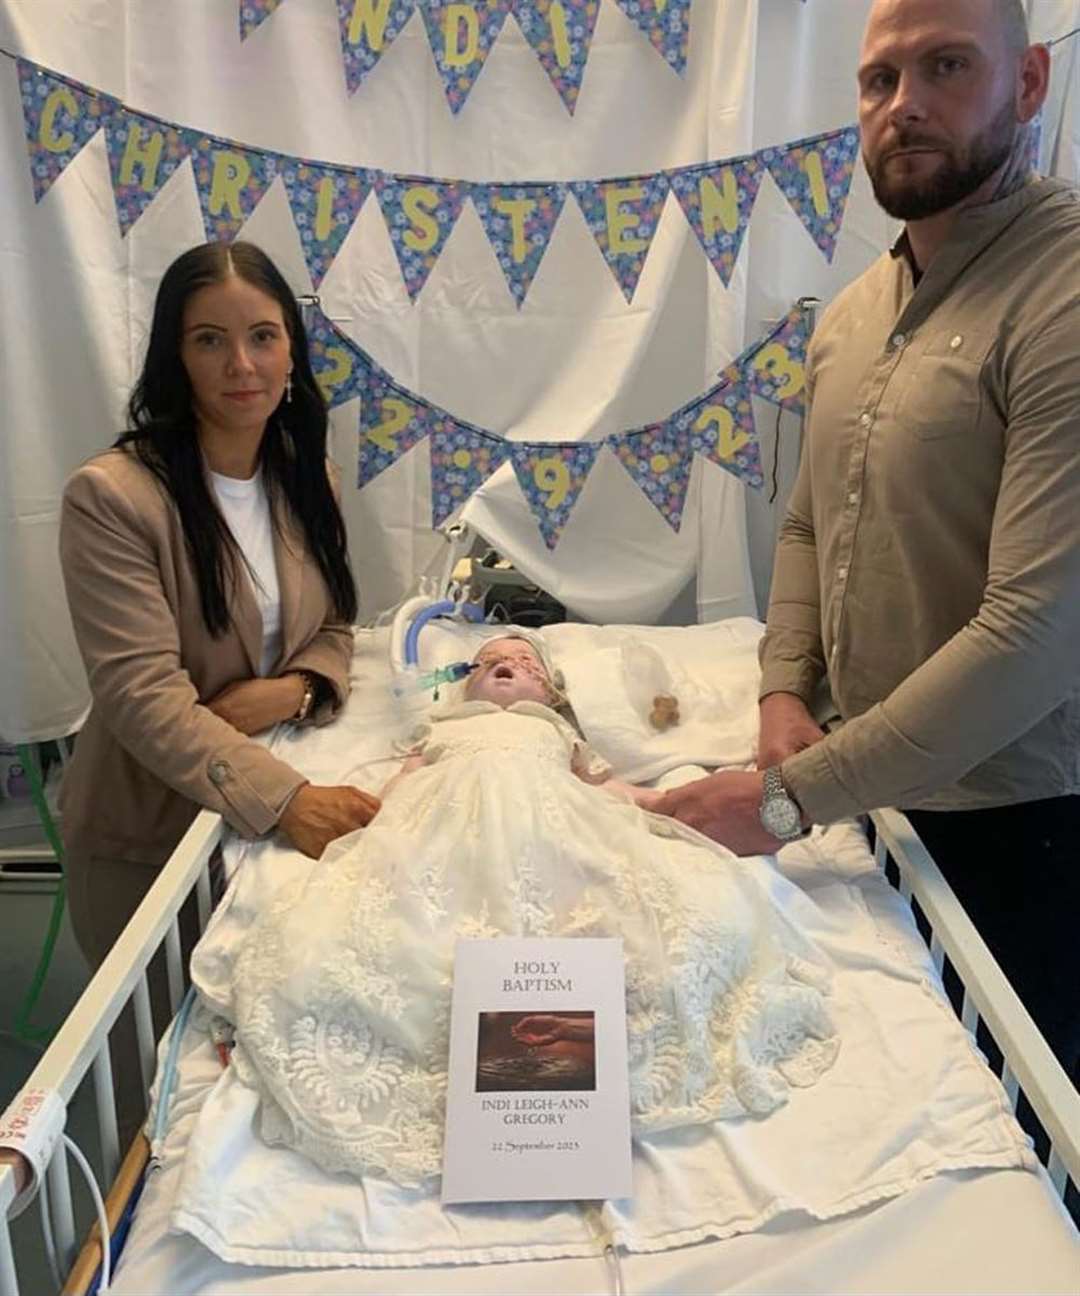 Dean Gregory and Claire Staniforth with their daughter Indi Gregory, who has died after specialists withdrew life-support treatment (Family/PA)